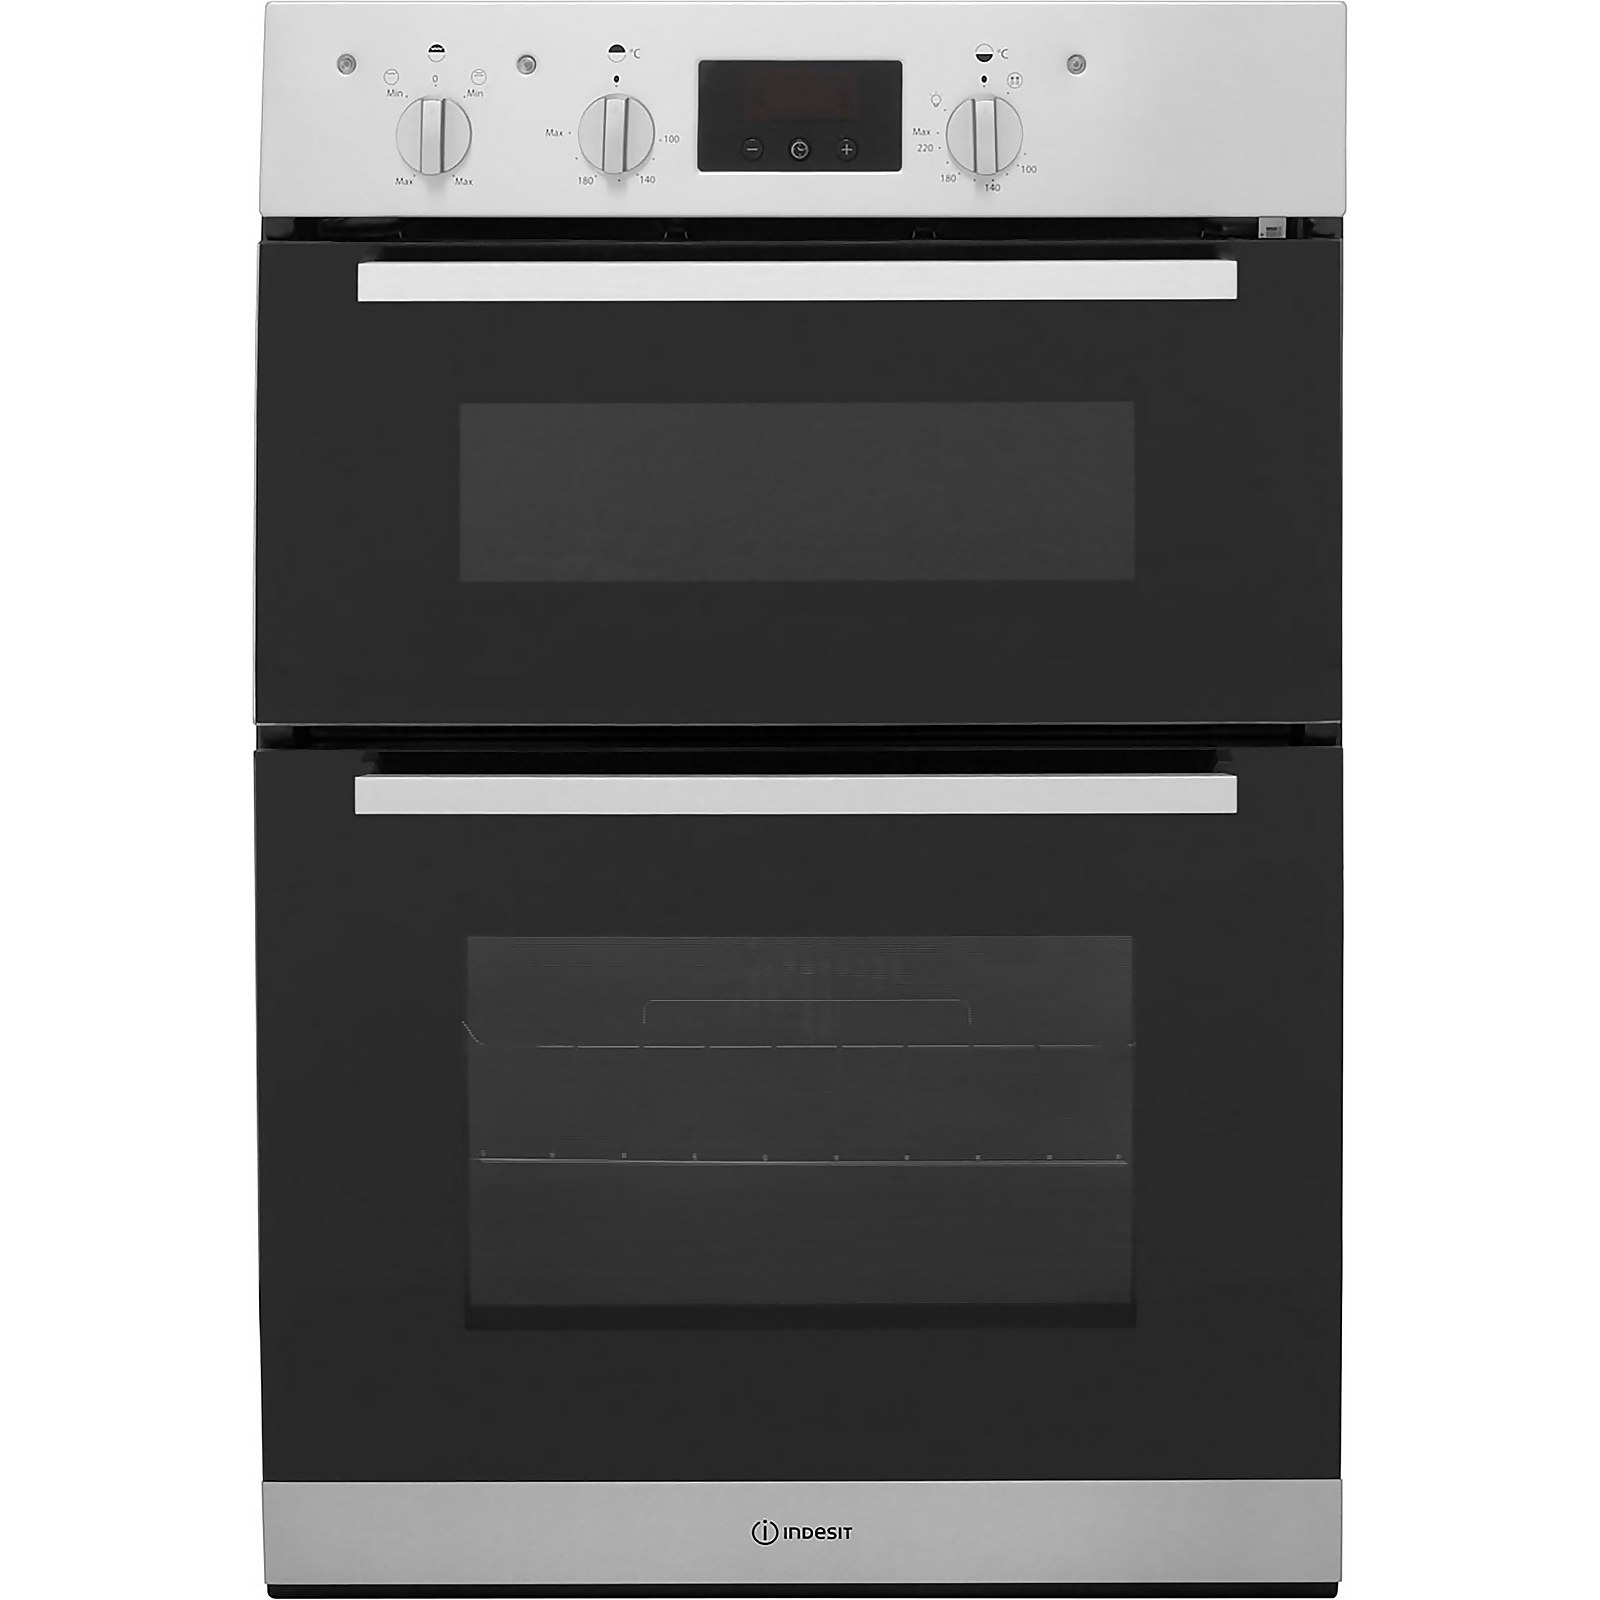 Photo of Indesit Aria Idd6340ix Built In Electric Double Oven - Stainless Steel